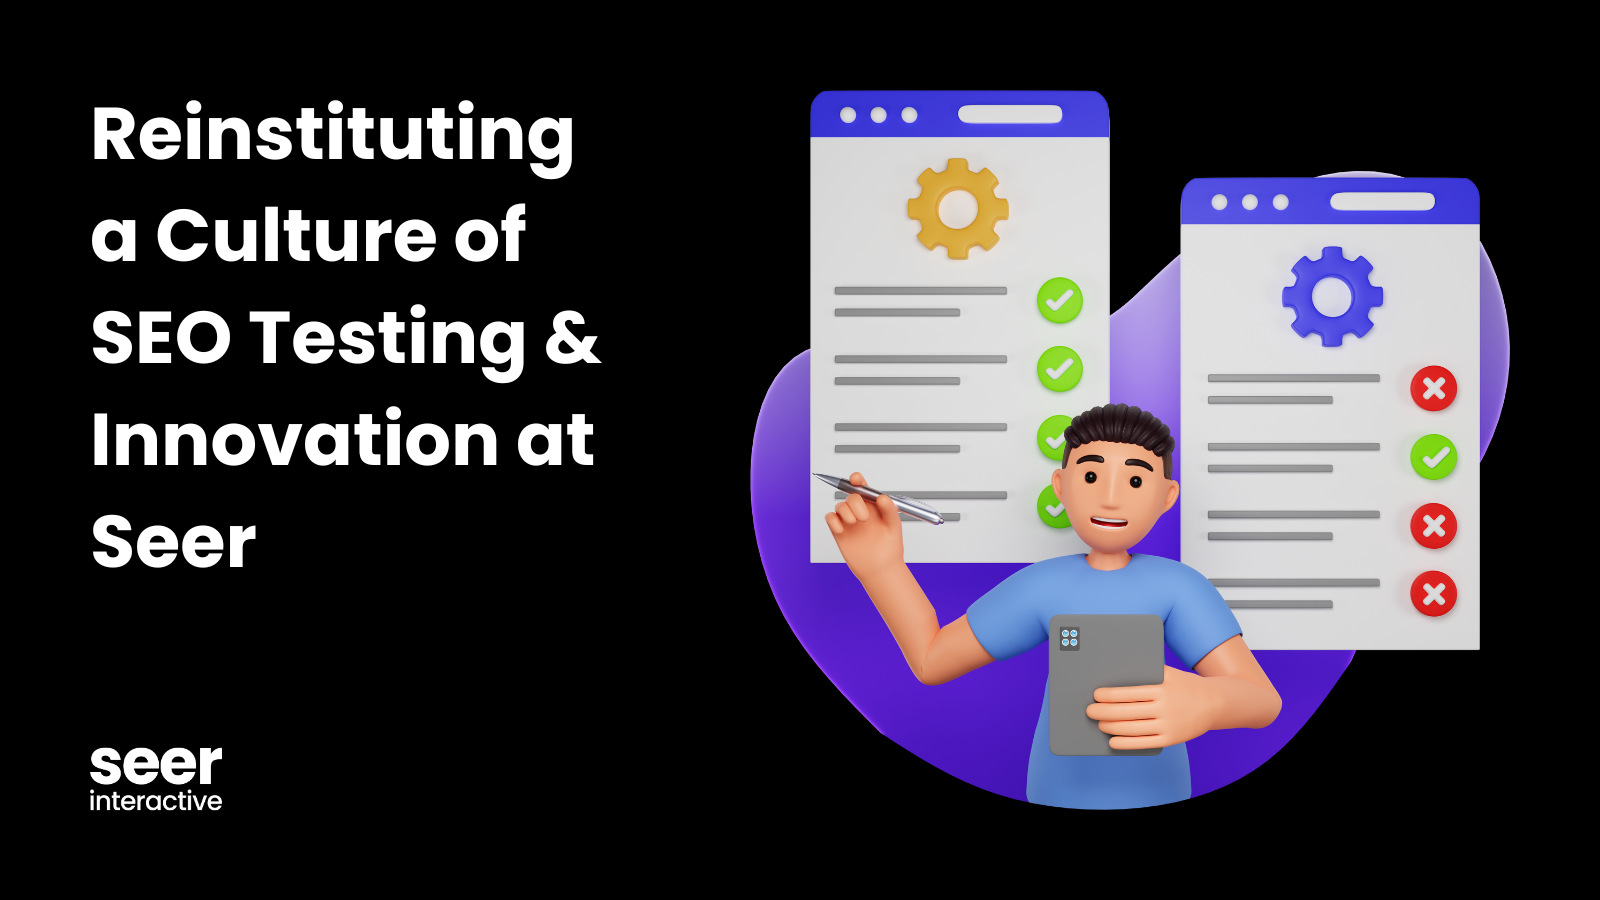 Reinstituting a Culture of SEO Testing & Innovation at Seer